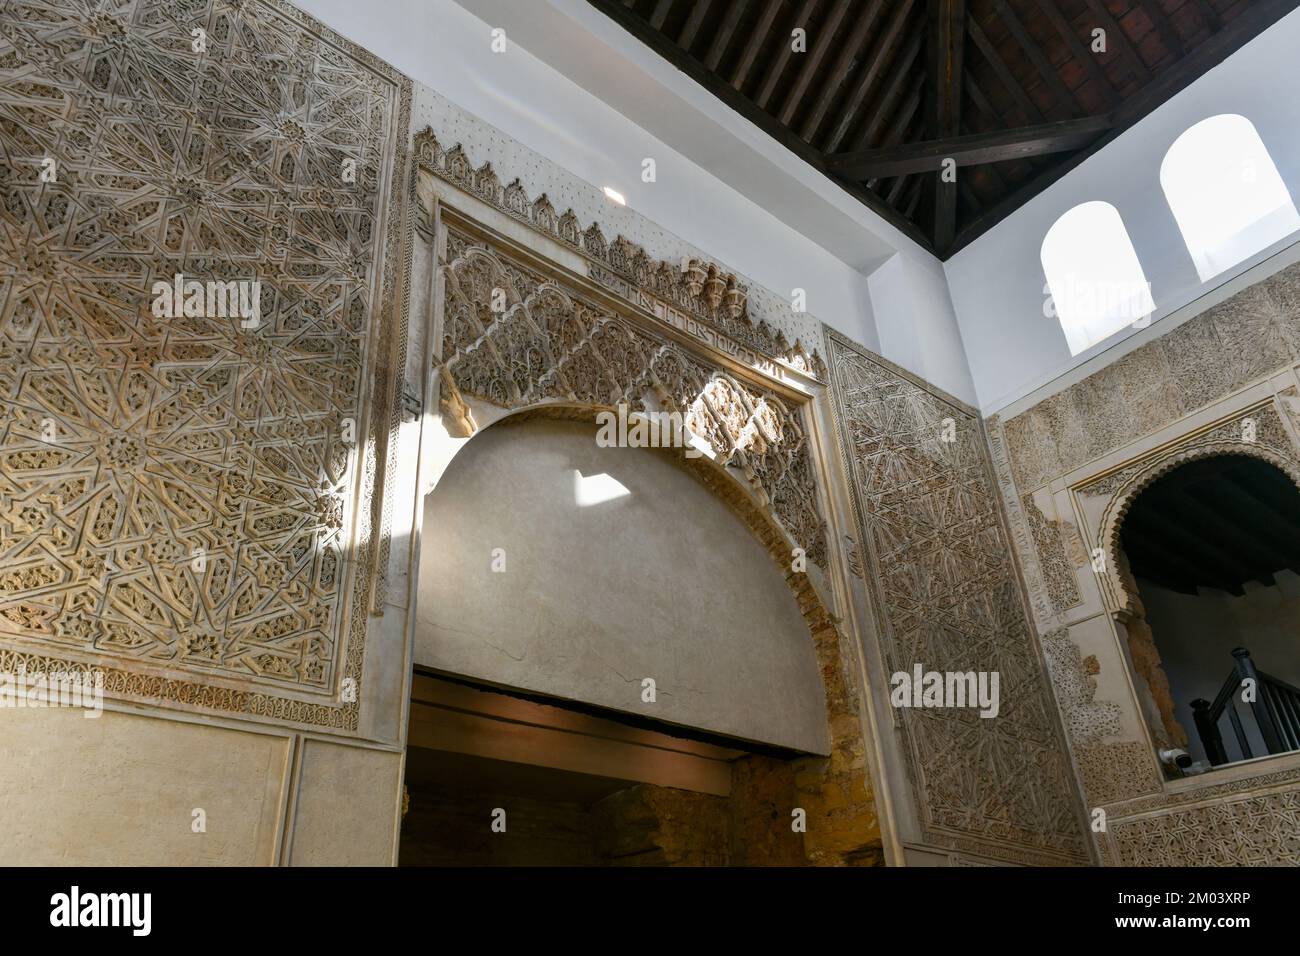 Cordoba, Spain - November 28, 2021: Inside the synagogue of Cordoba, Spain. Jewish temple founded in 1315 in Andalusia Spain. Stock Photo